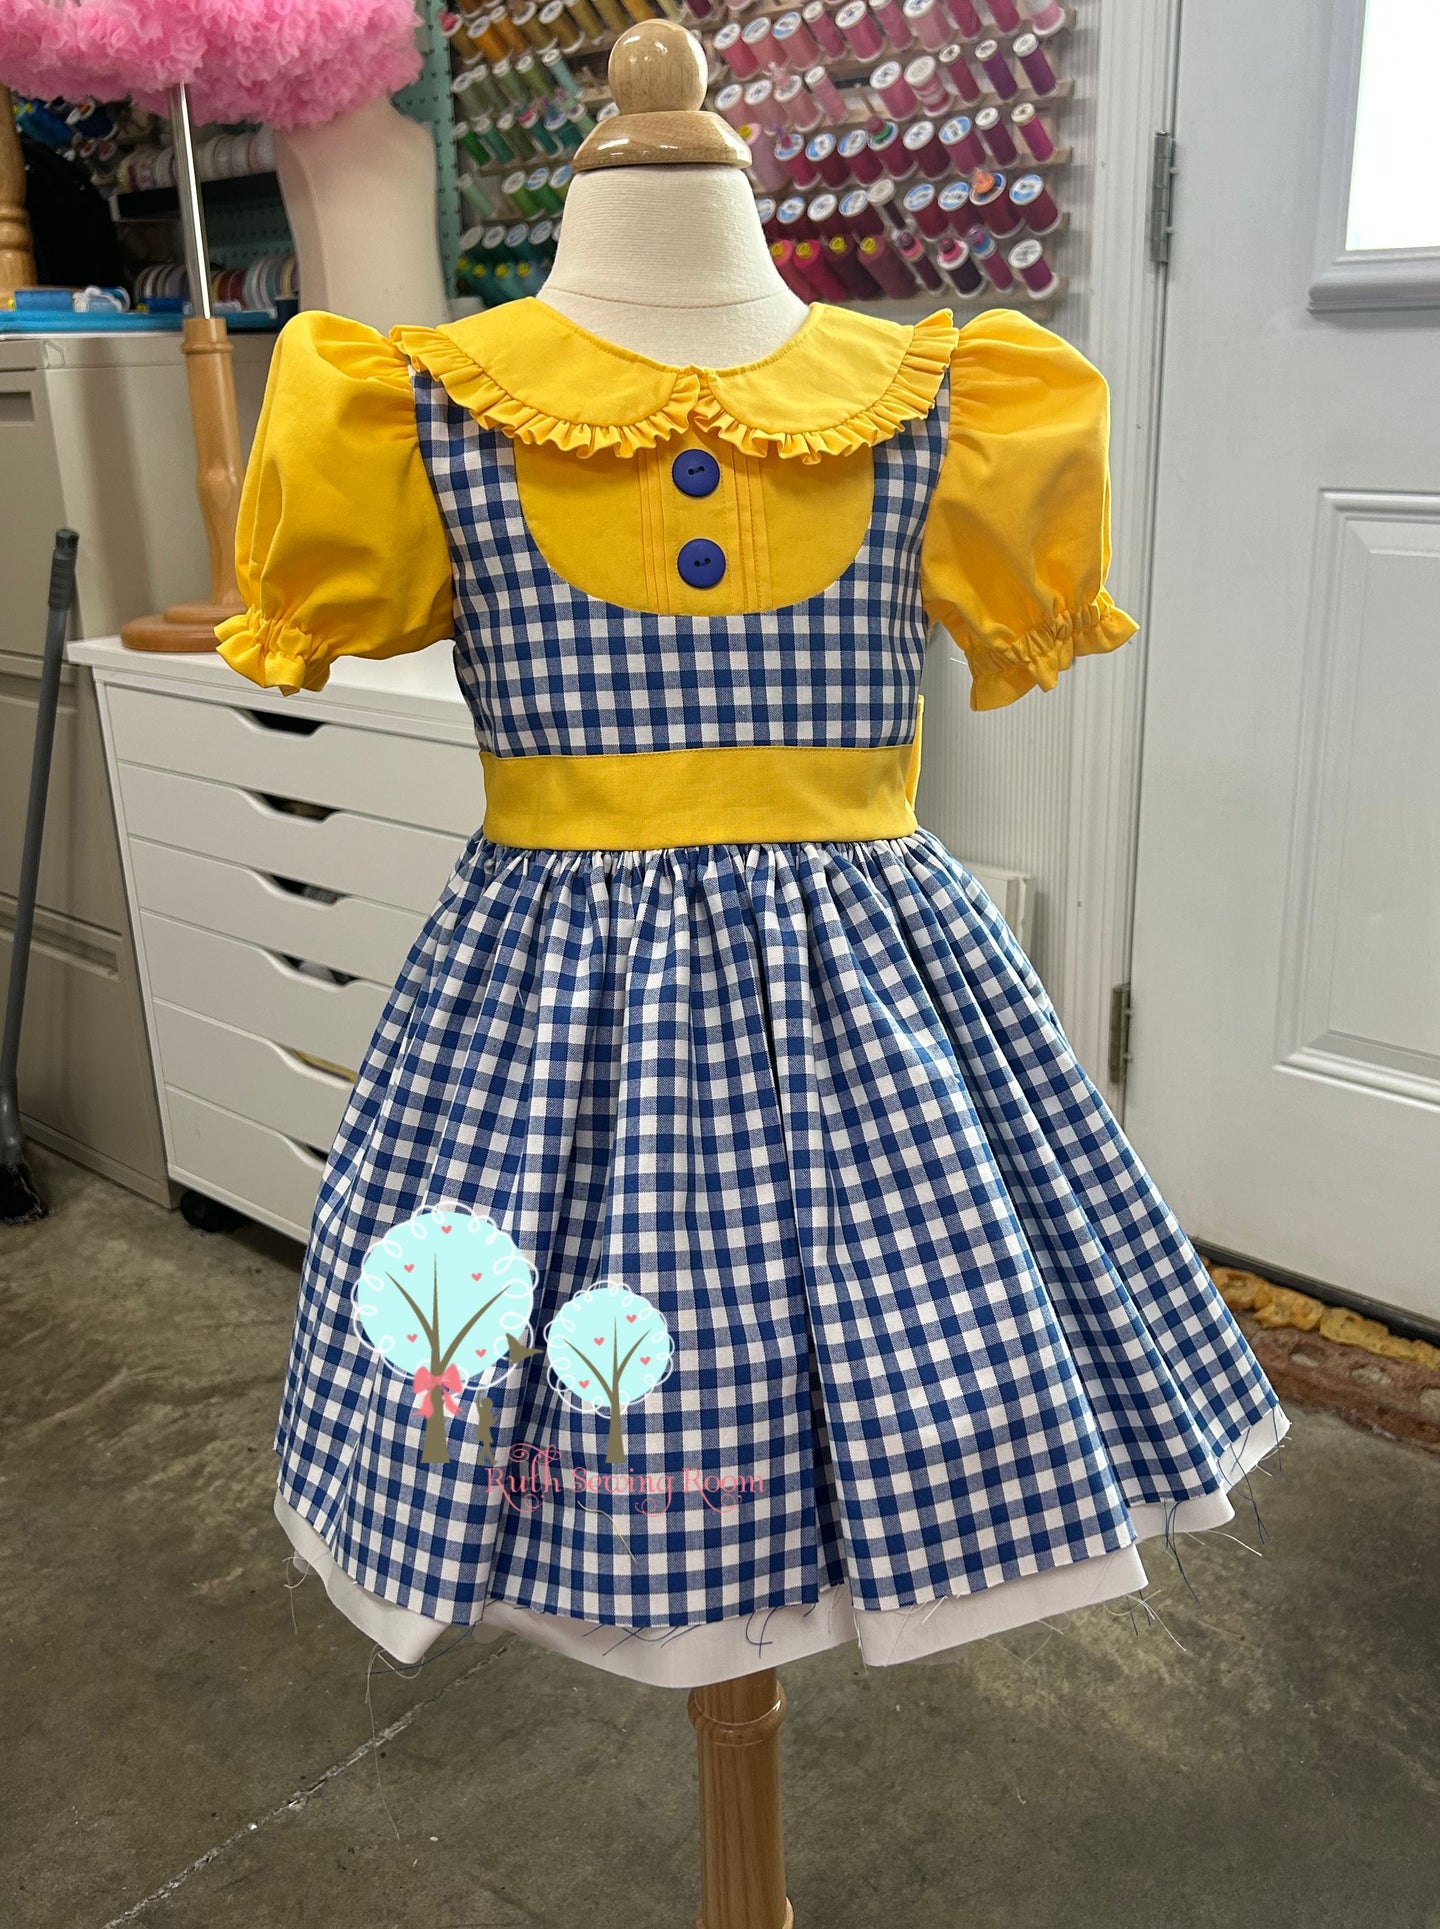 OOAK Interview dress -  Personalized Dress - Yellow and Royal Blue Gingham